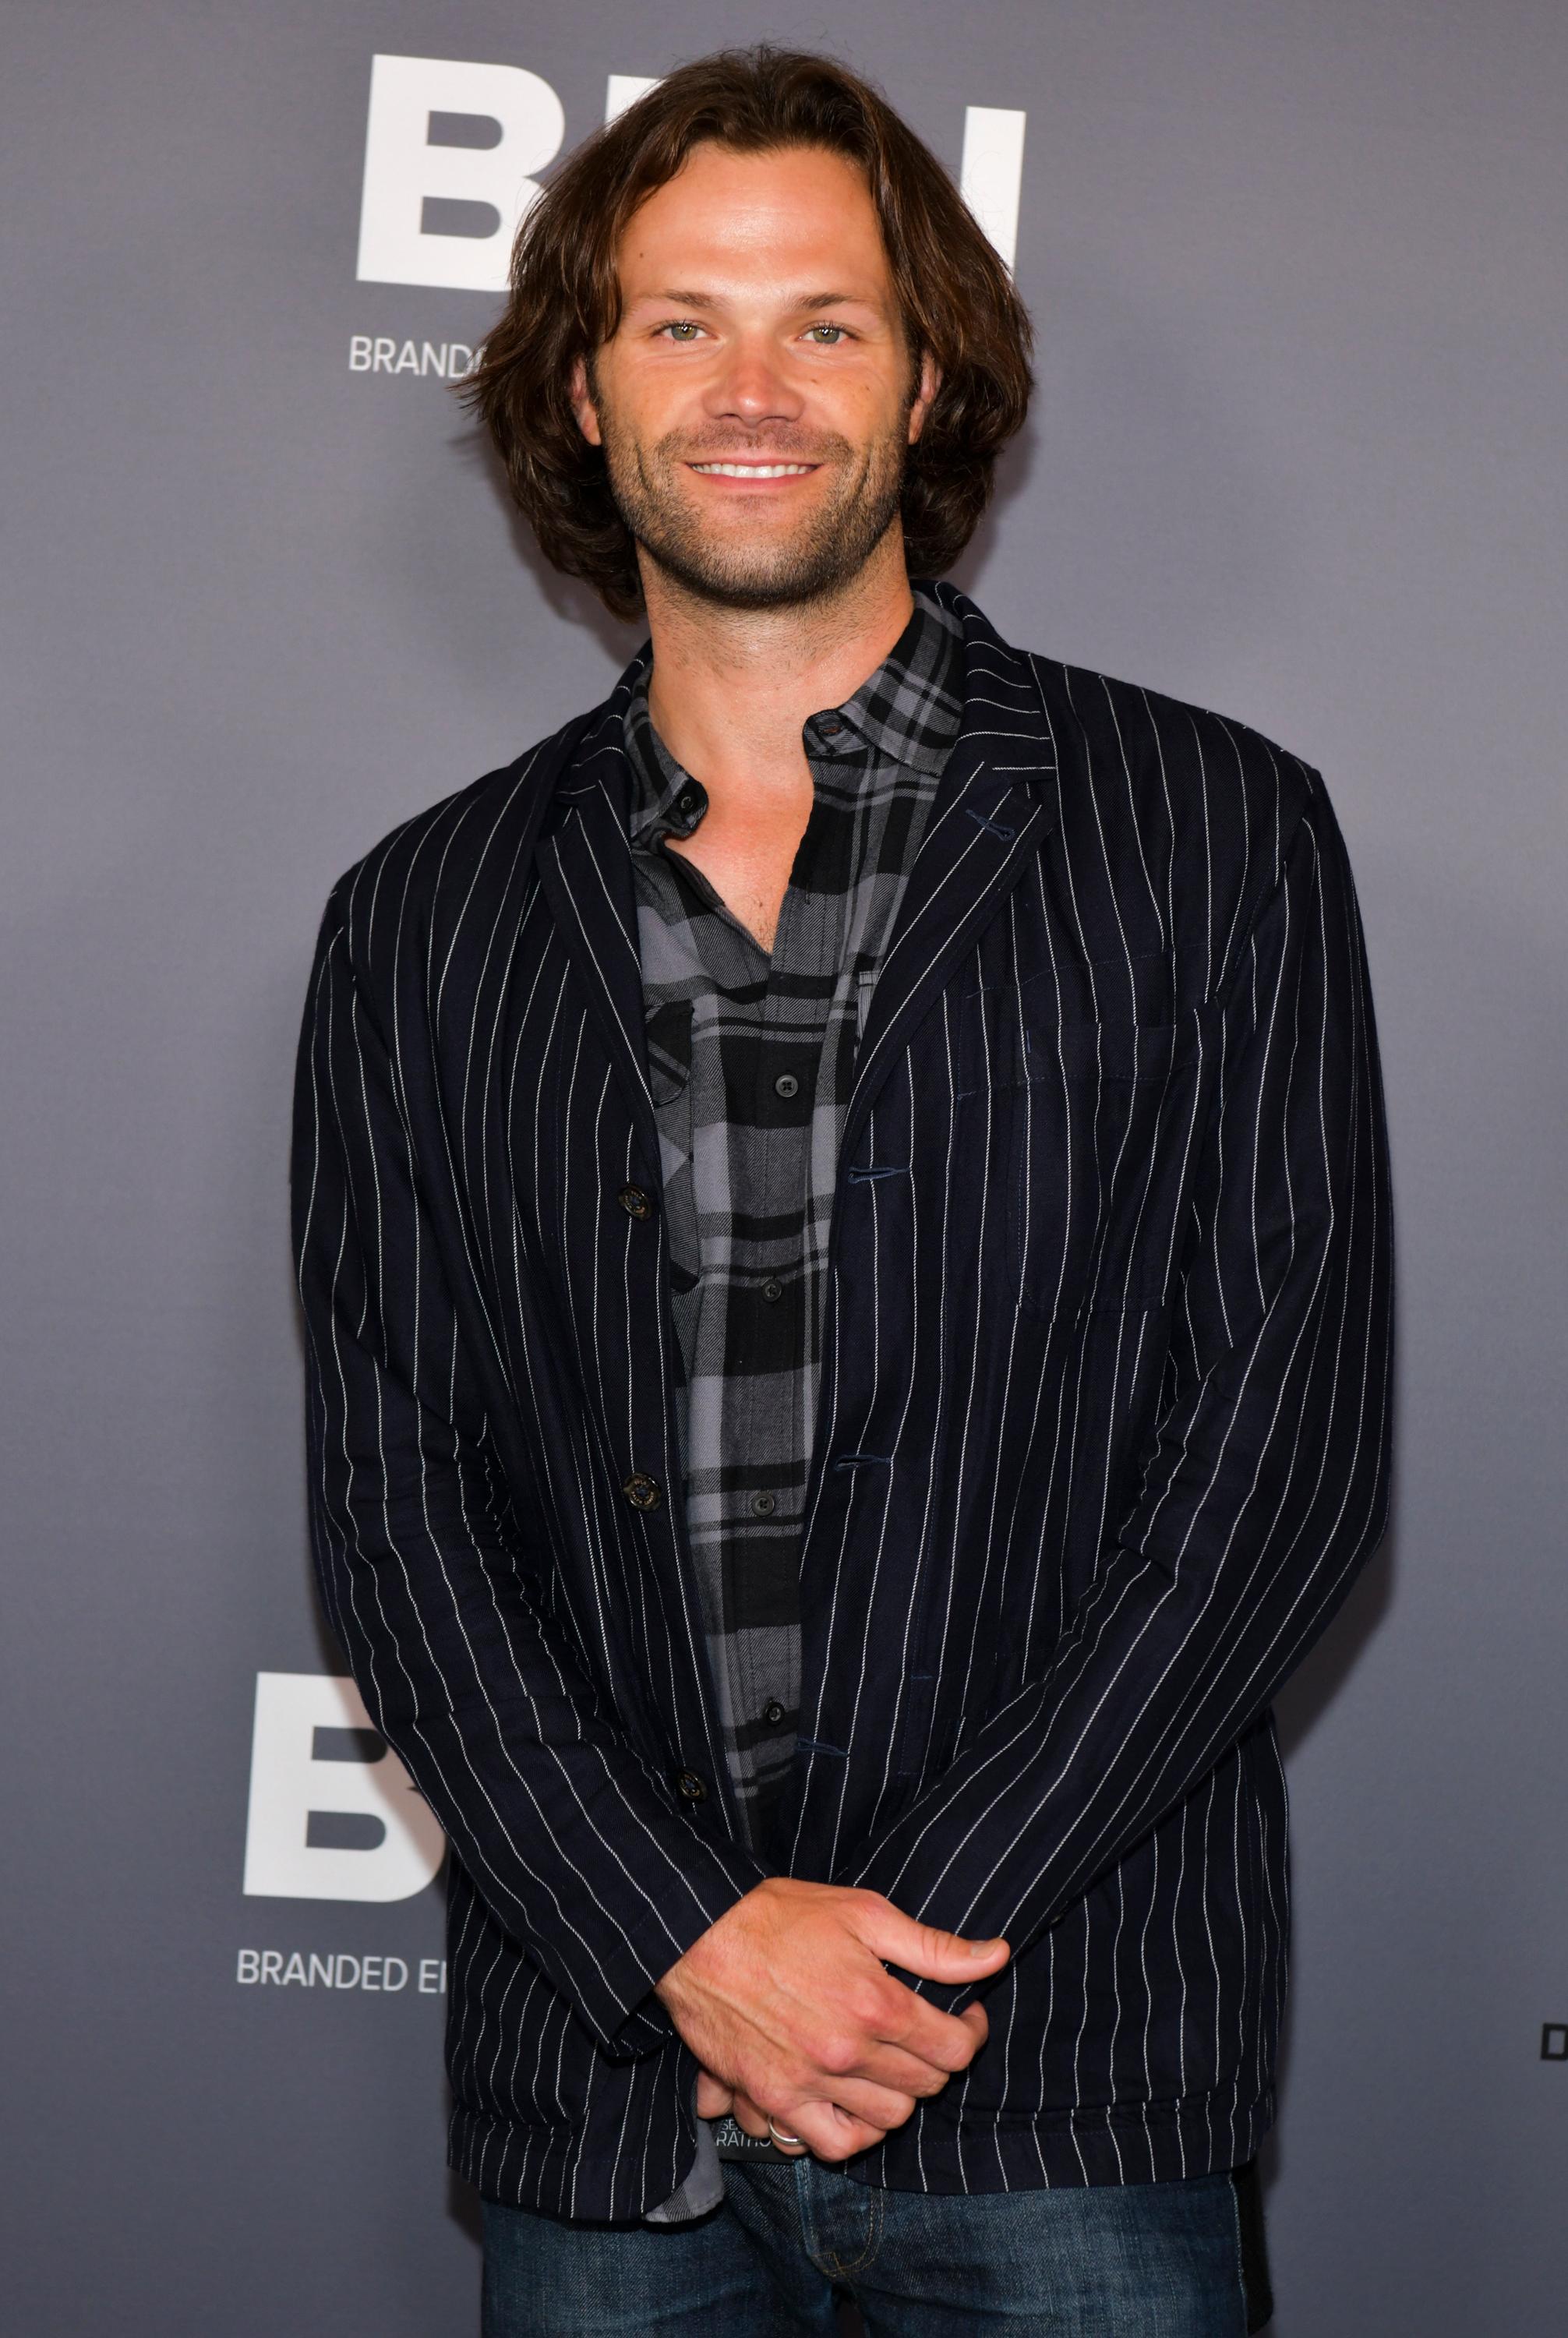 Jared Padalecki Makes Heartfelt Plea To Fans: Do What Makes You Happy